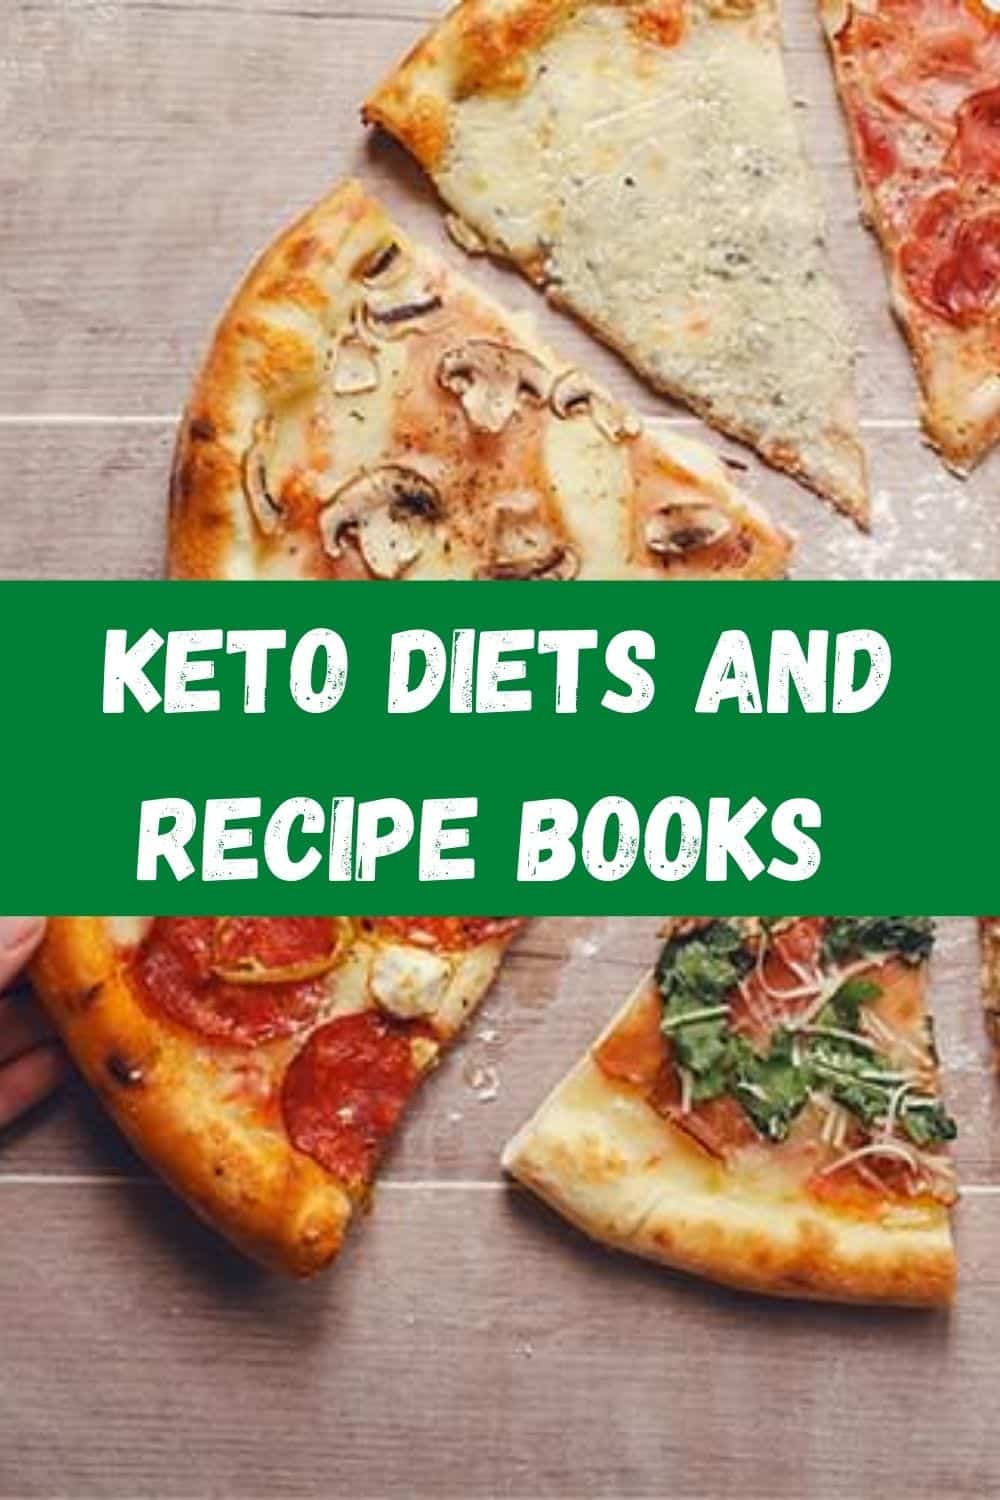 banner with a pizza advertising keto diets and recipes books